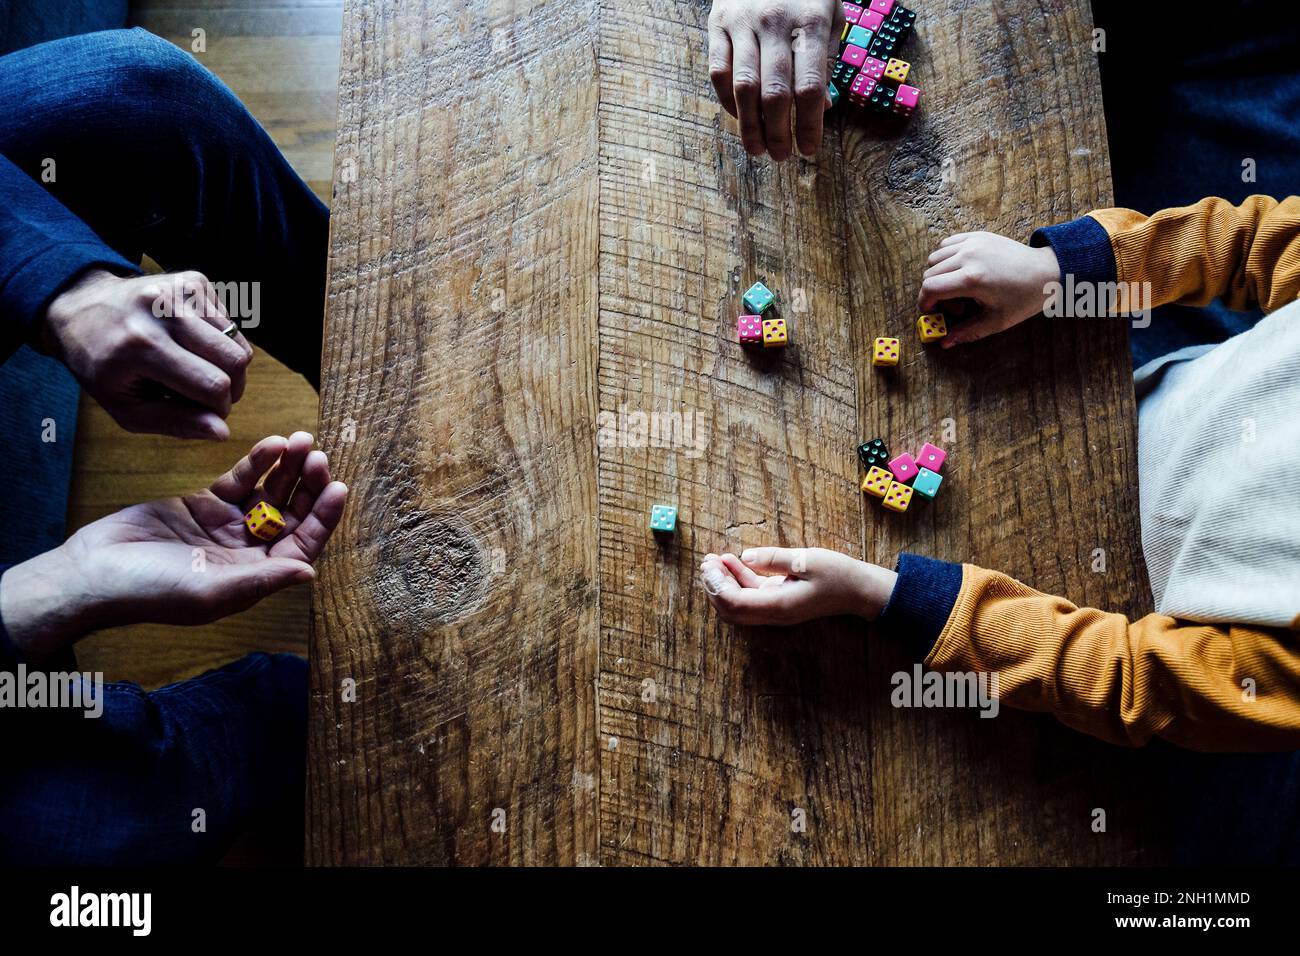 Caucasian Family Playing Colorful Dice Game at Wooden Coffee Table Stock Photo